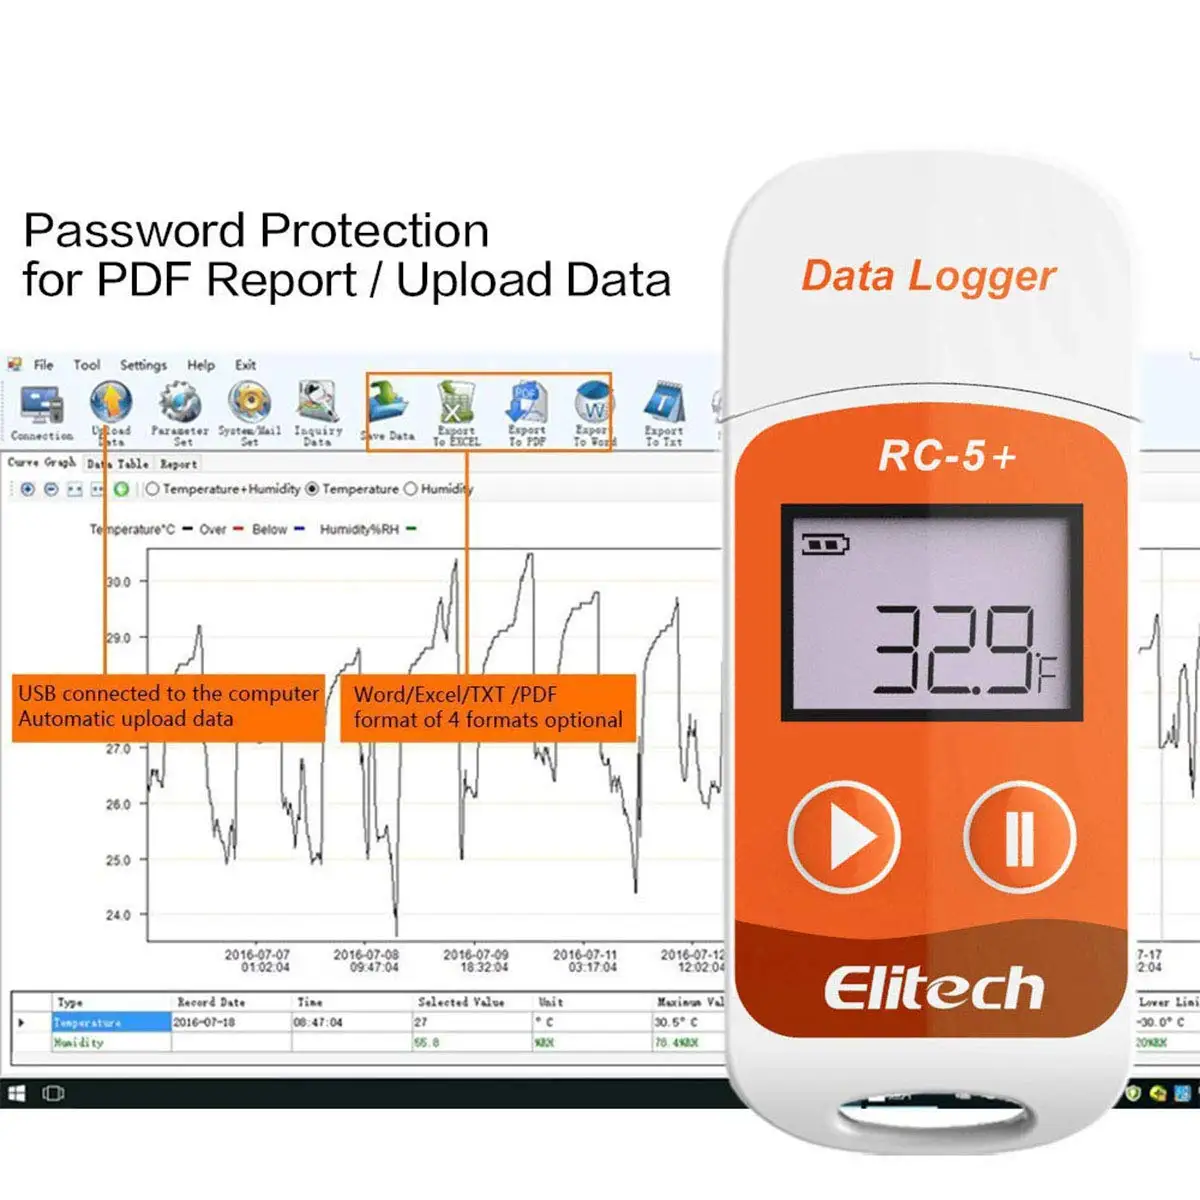 

Elitech RC-5+ PDF USB Temperature Data Logger Reusable Recorder 32000 Points for Refrigeration, Cold Chain Transport